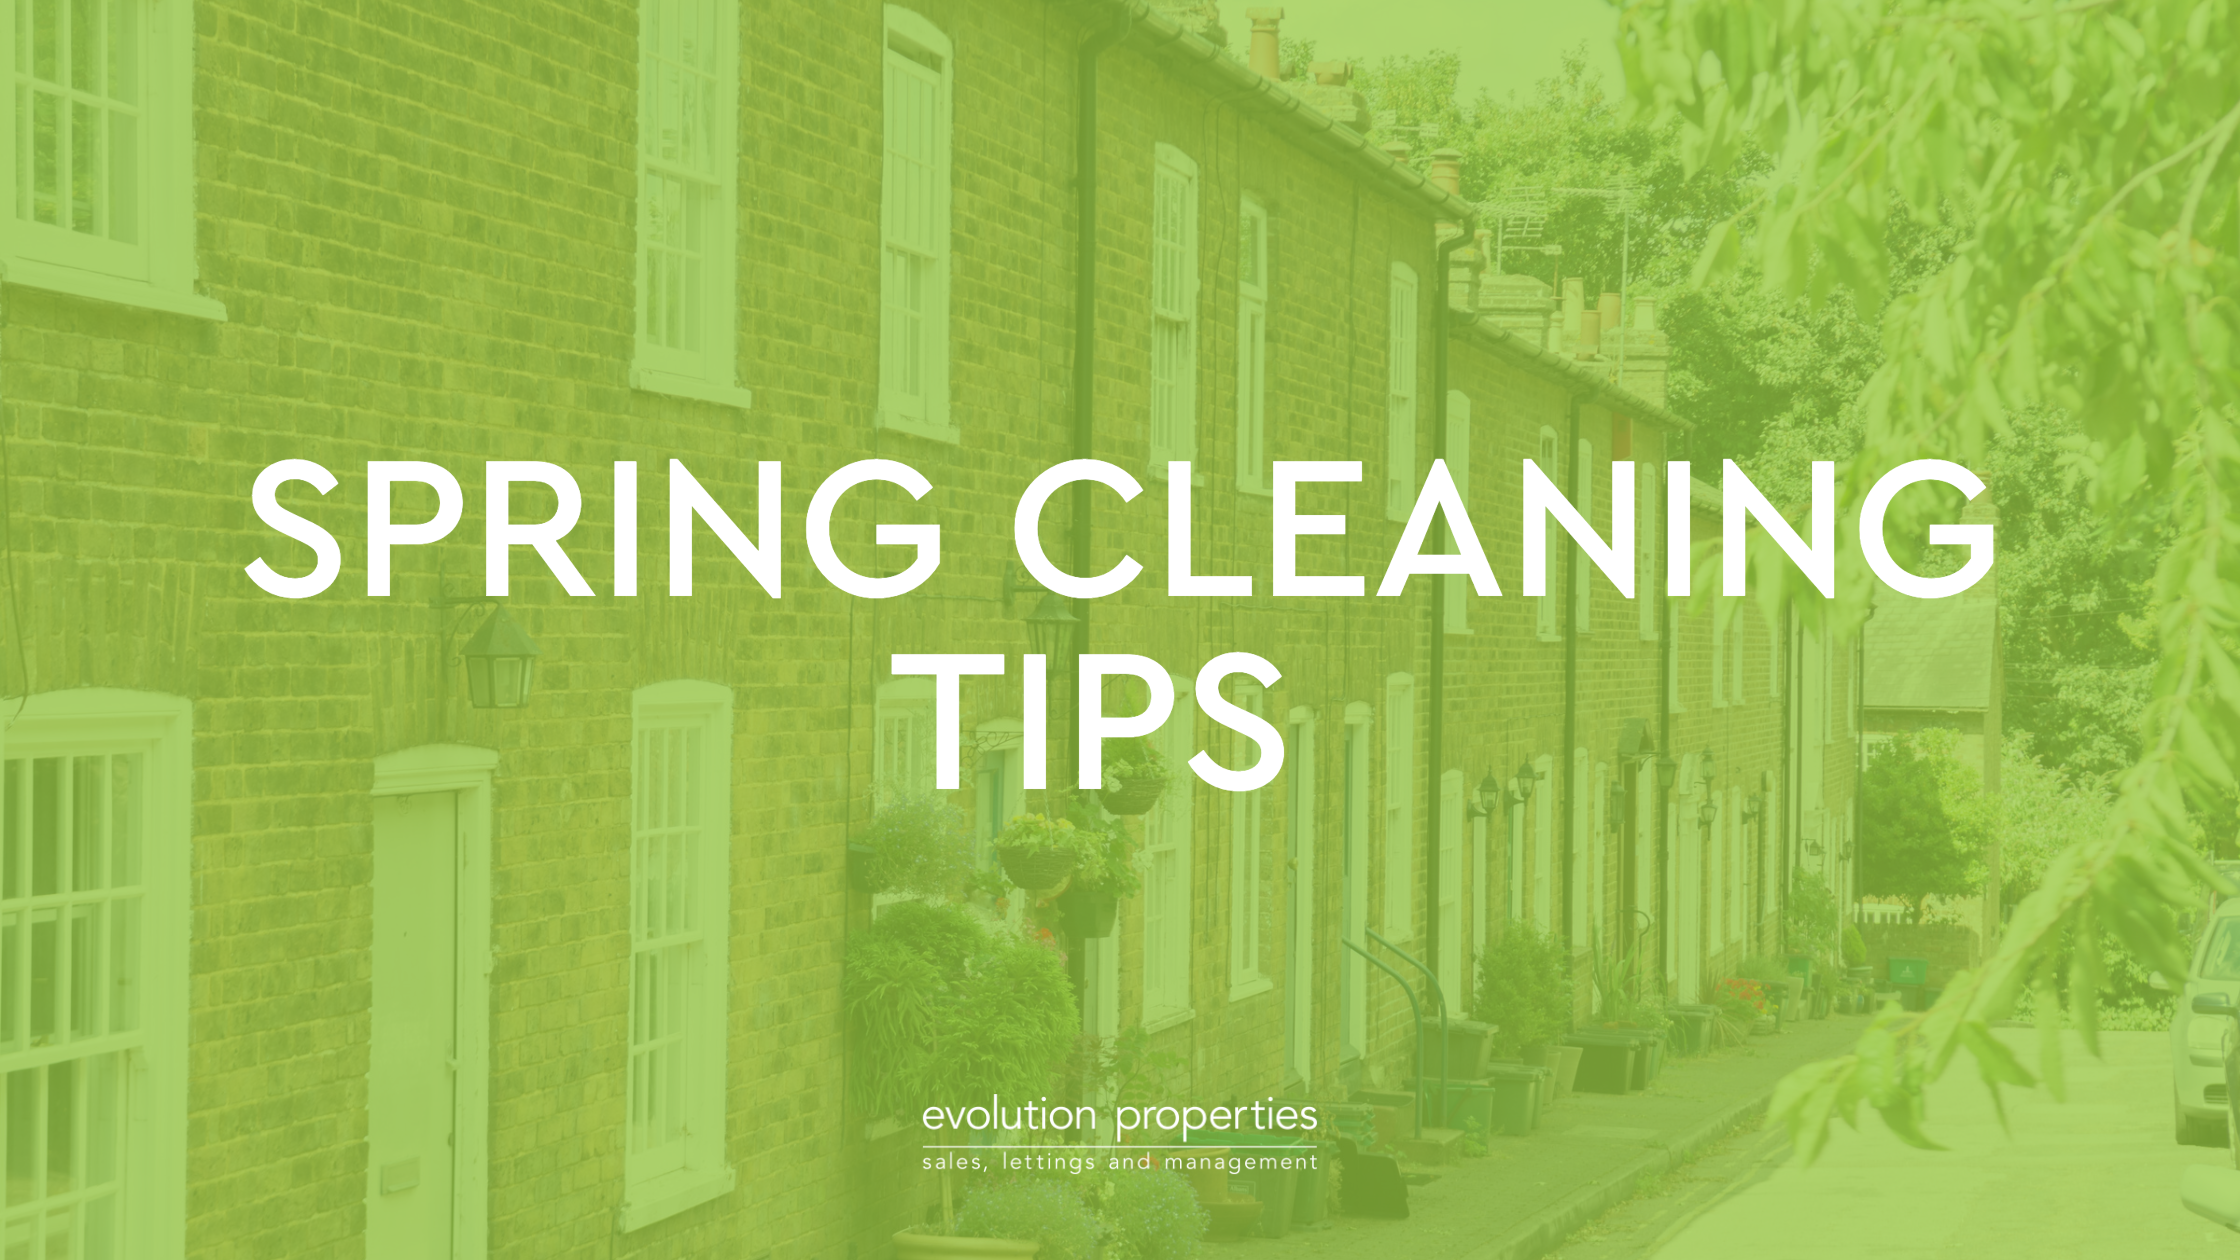 Spring cleaning tips!